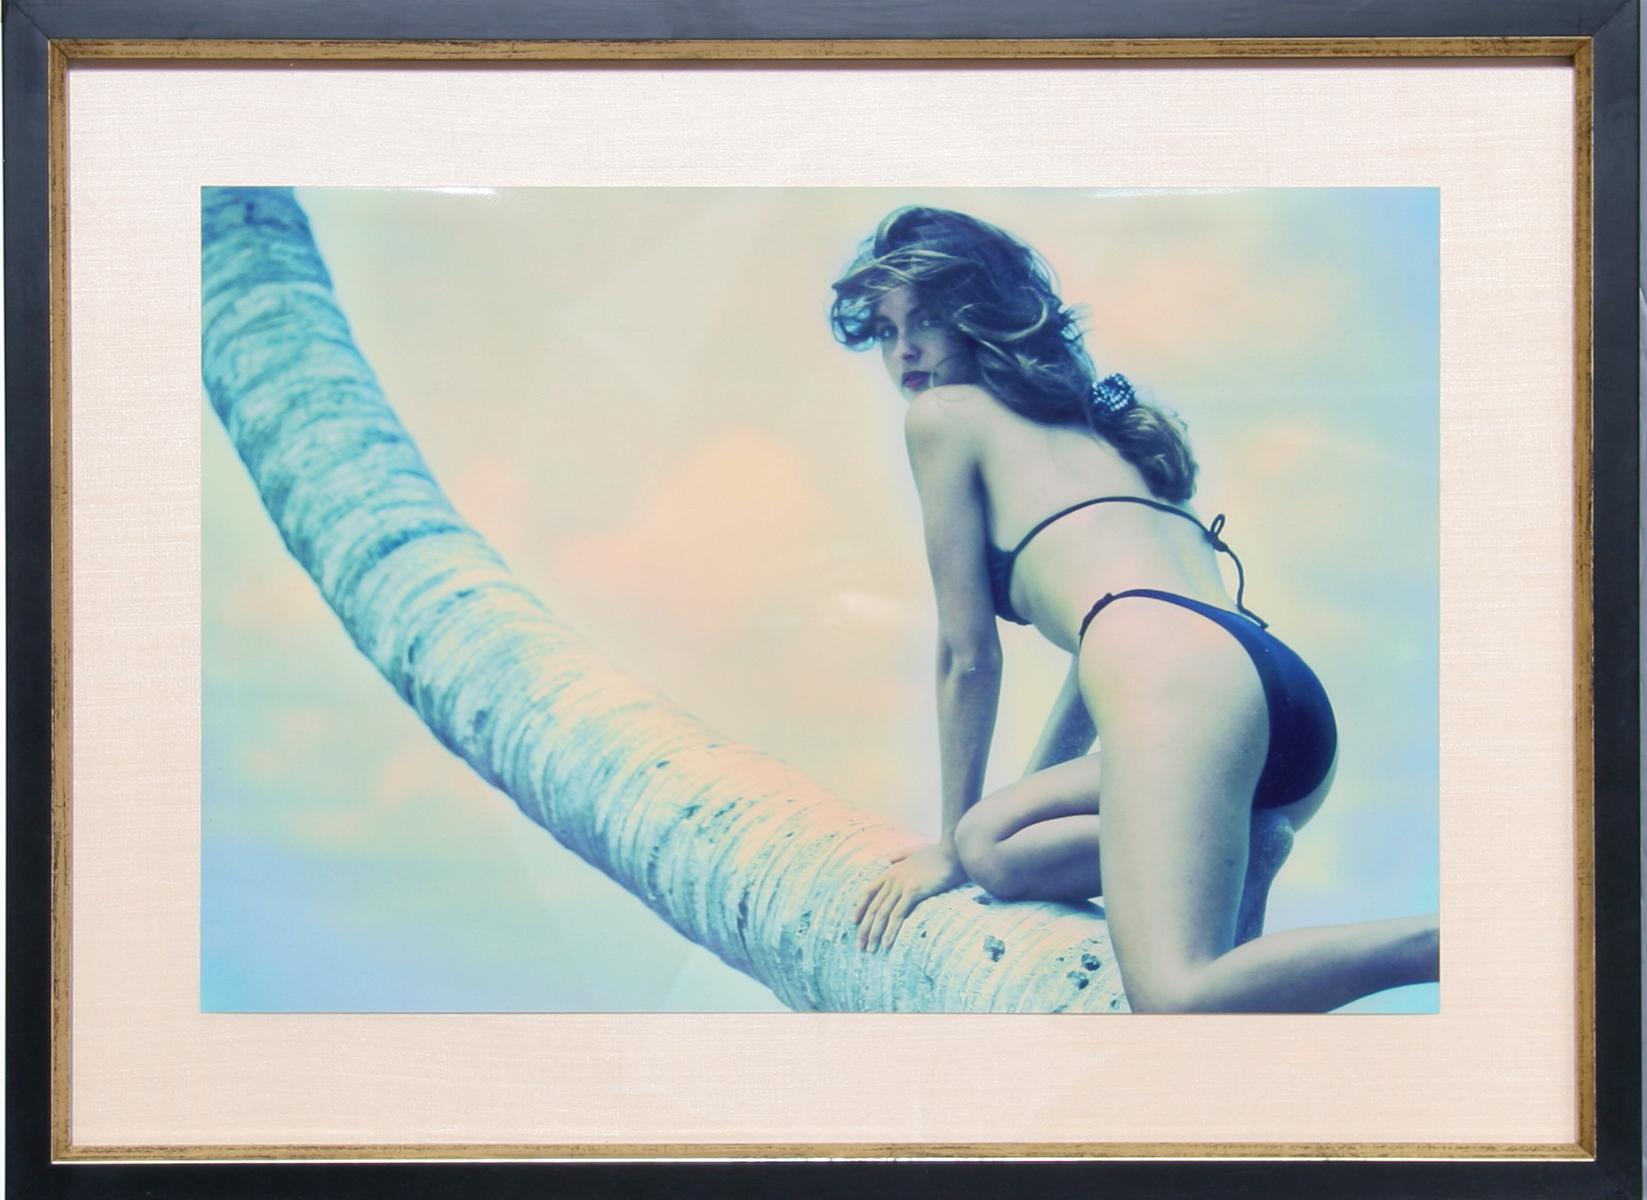 Artist: Willie Miller, American (1940 - )
Title: South Beach
Year: 1998
Medium: Color Photograph 
Size: 12 in. x 18 in. (30.48 cm x 45.72 cm)
Frame Size: 17.5 x 23.5 inches